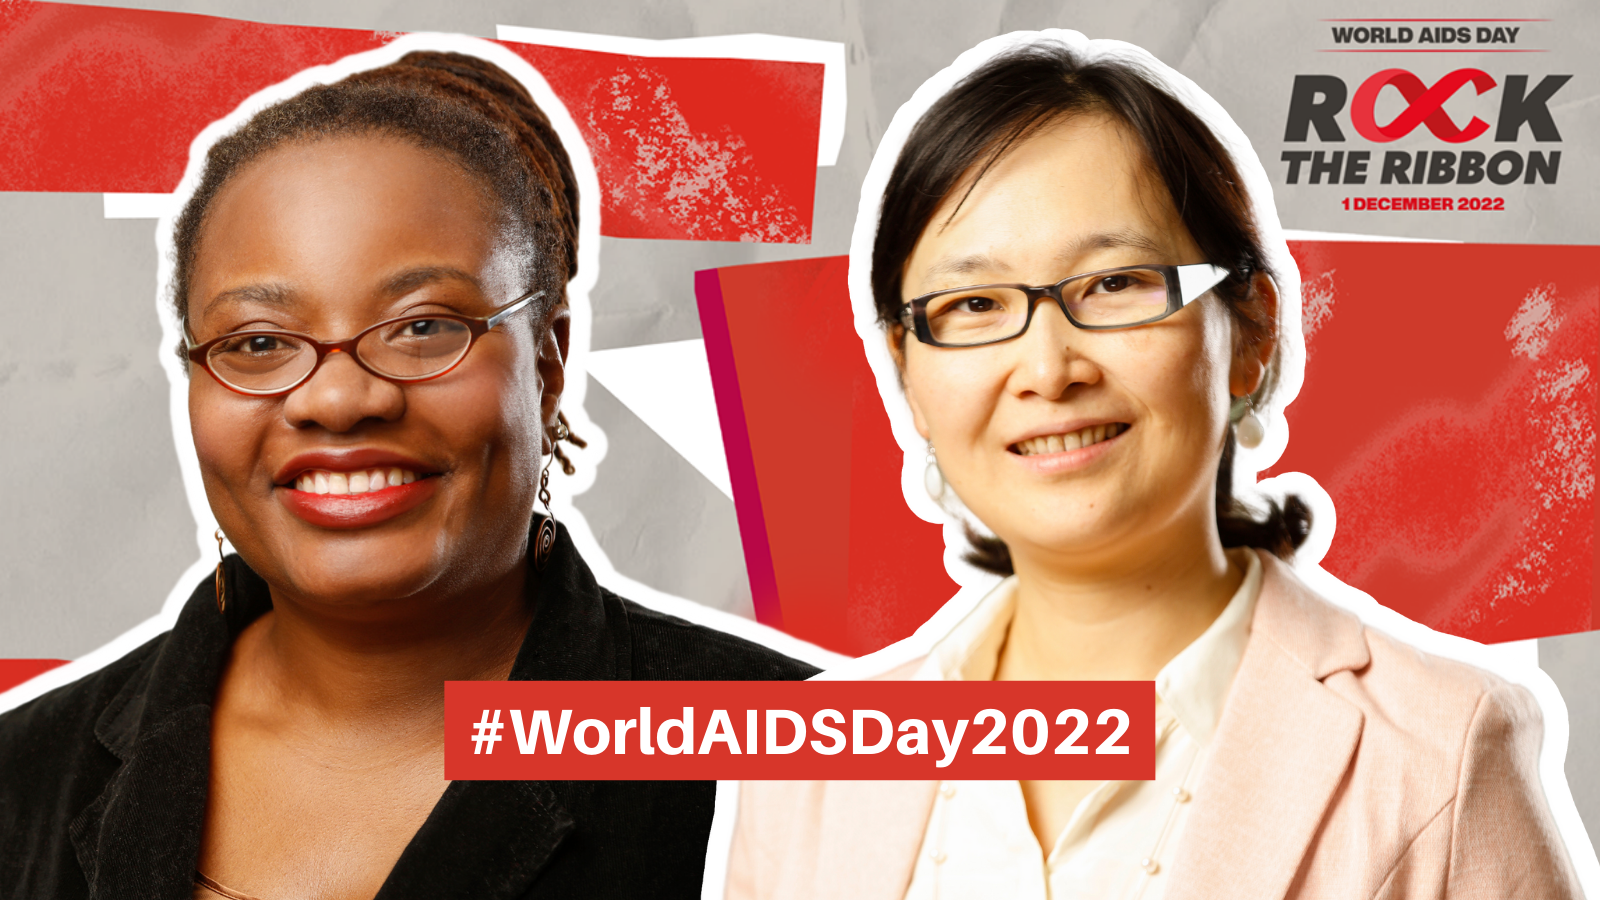 Photo of Natalie LeBlanc and Chen Zhang with the World AIDS Day logo on a red and tan background